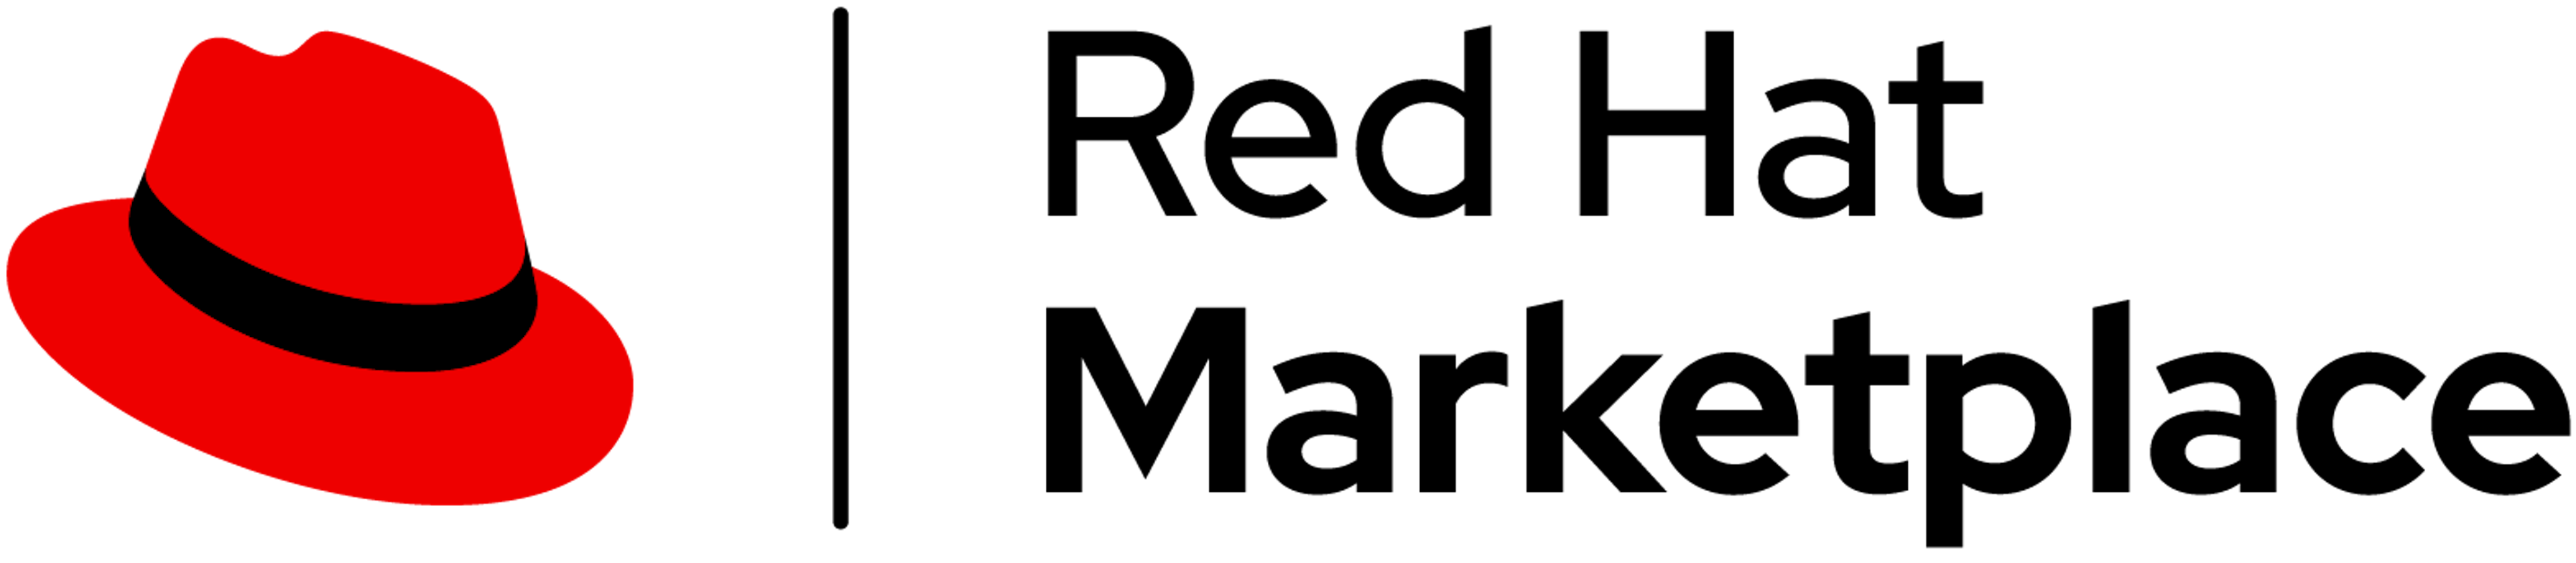 red-hat-marketplace